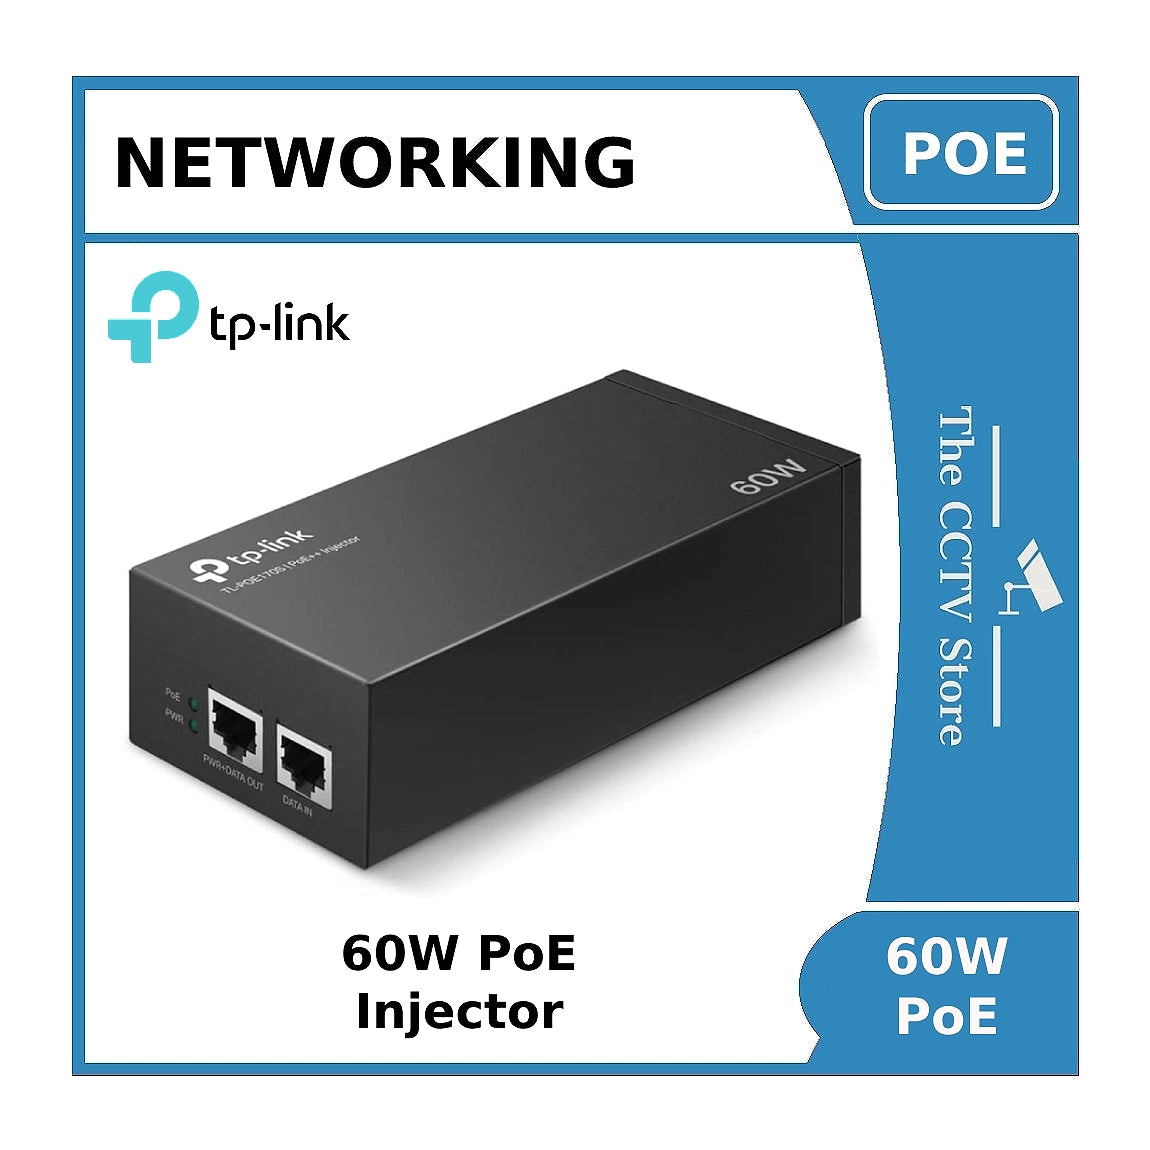 60W POE Injector for Hikvision and Dahua IP PTZ Cameras - Ubiquiti or WiTek or Ruijie